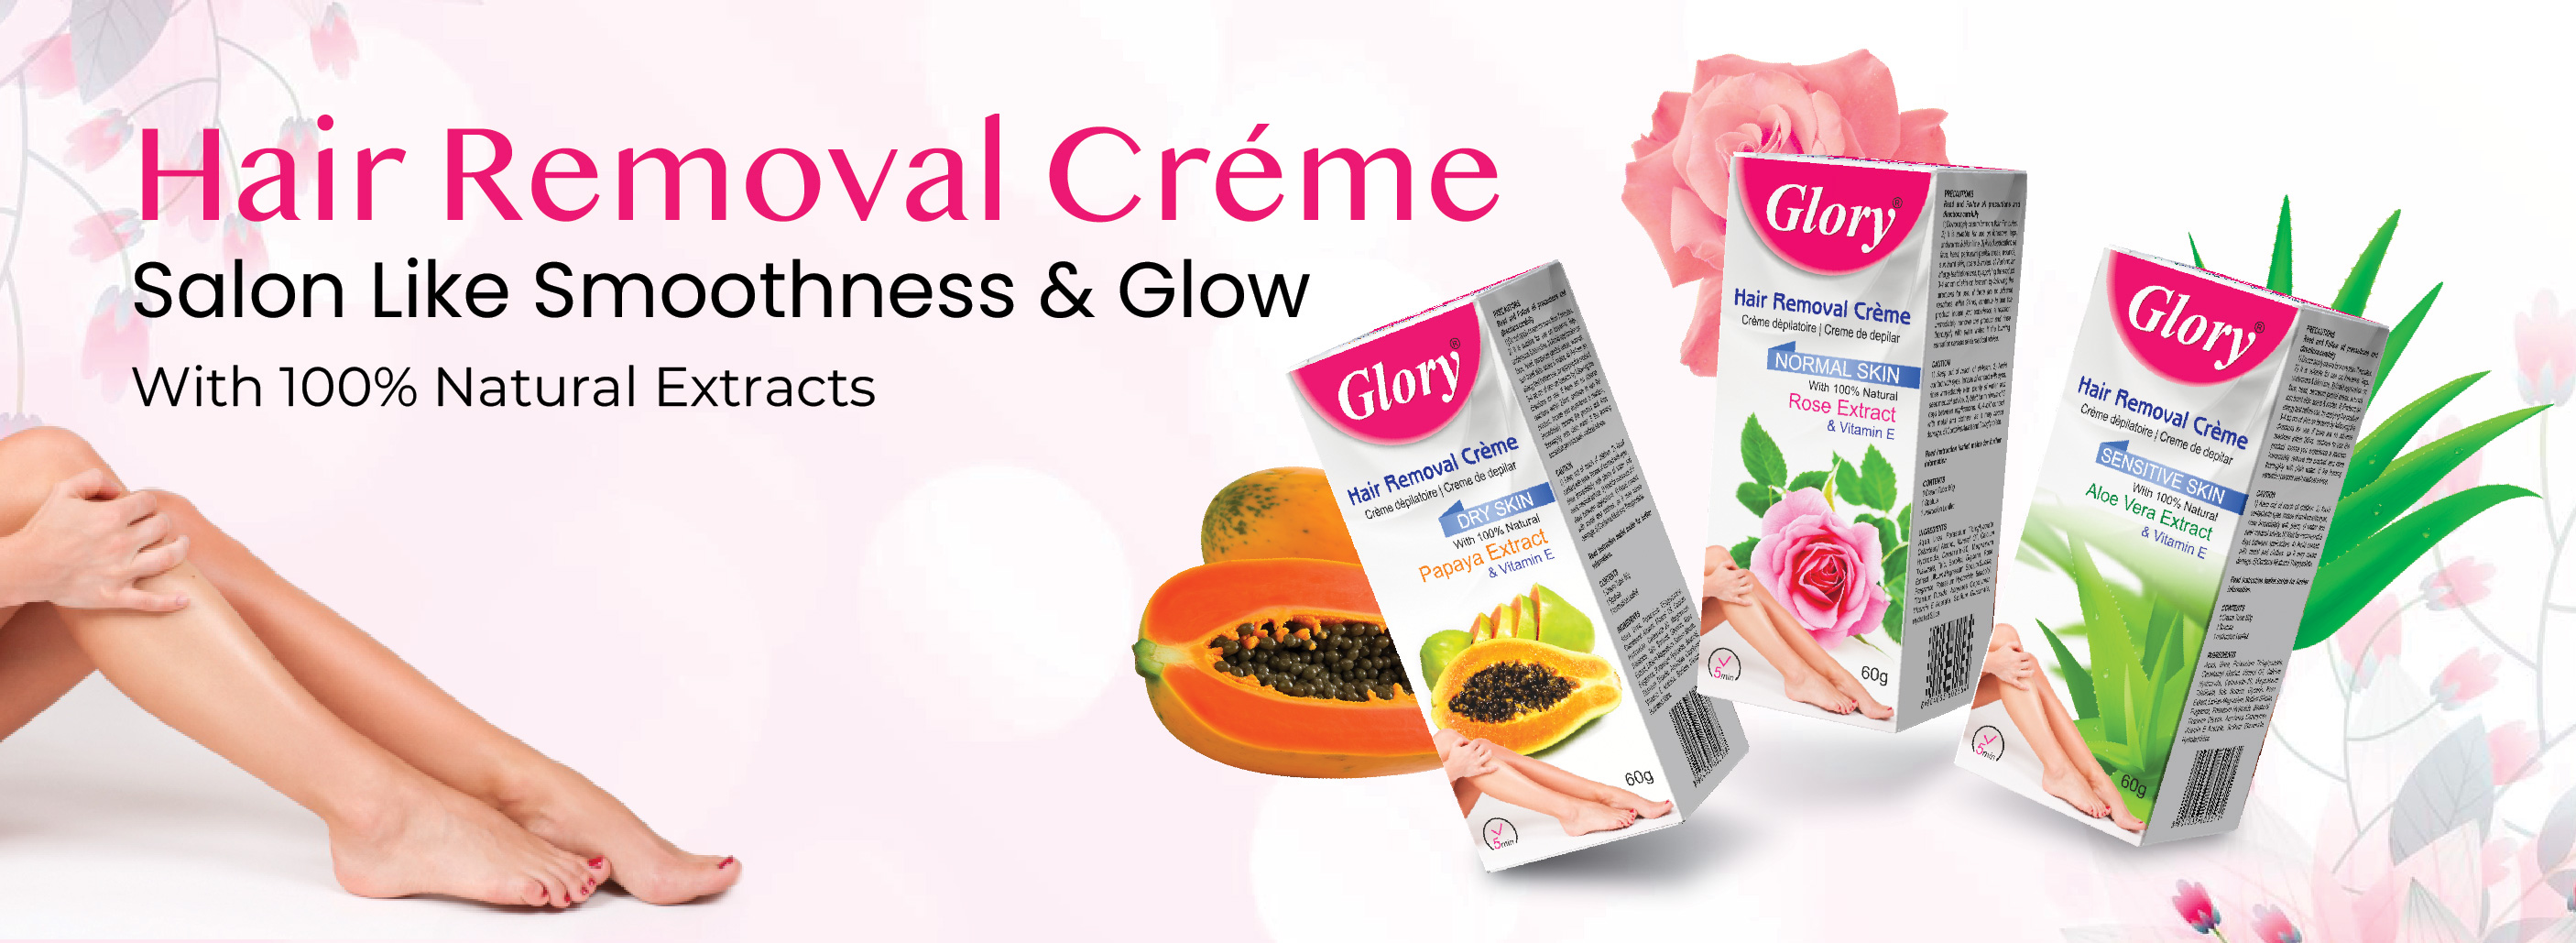 Hair Removal Creme Manufacturer | Hair Removal Creme Manufacturer in Morocco